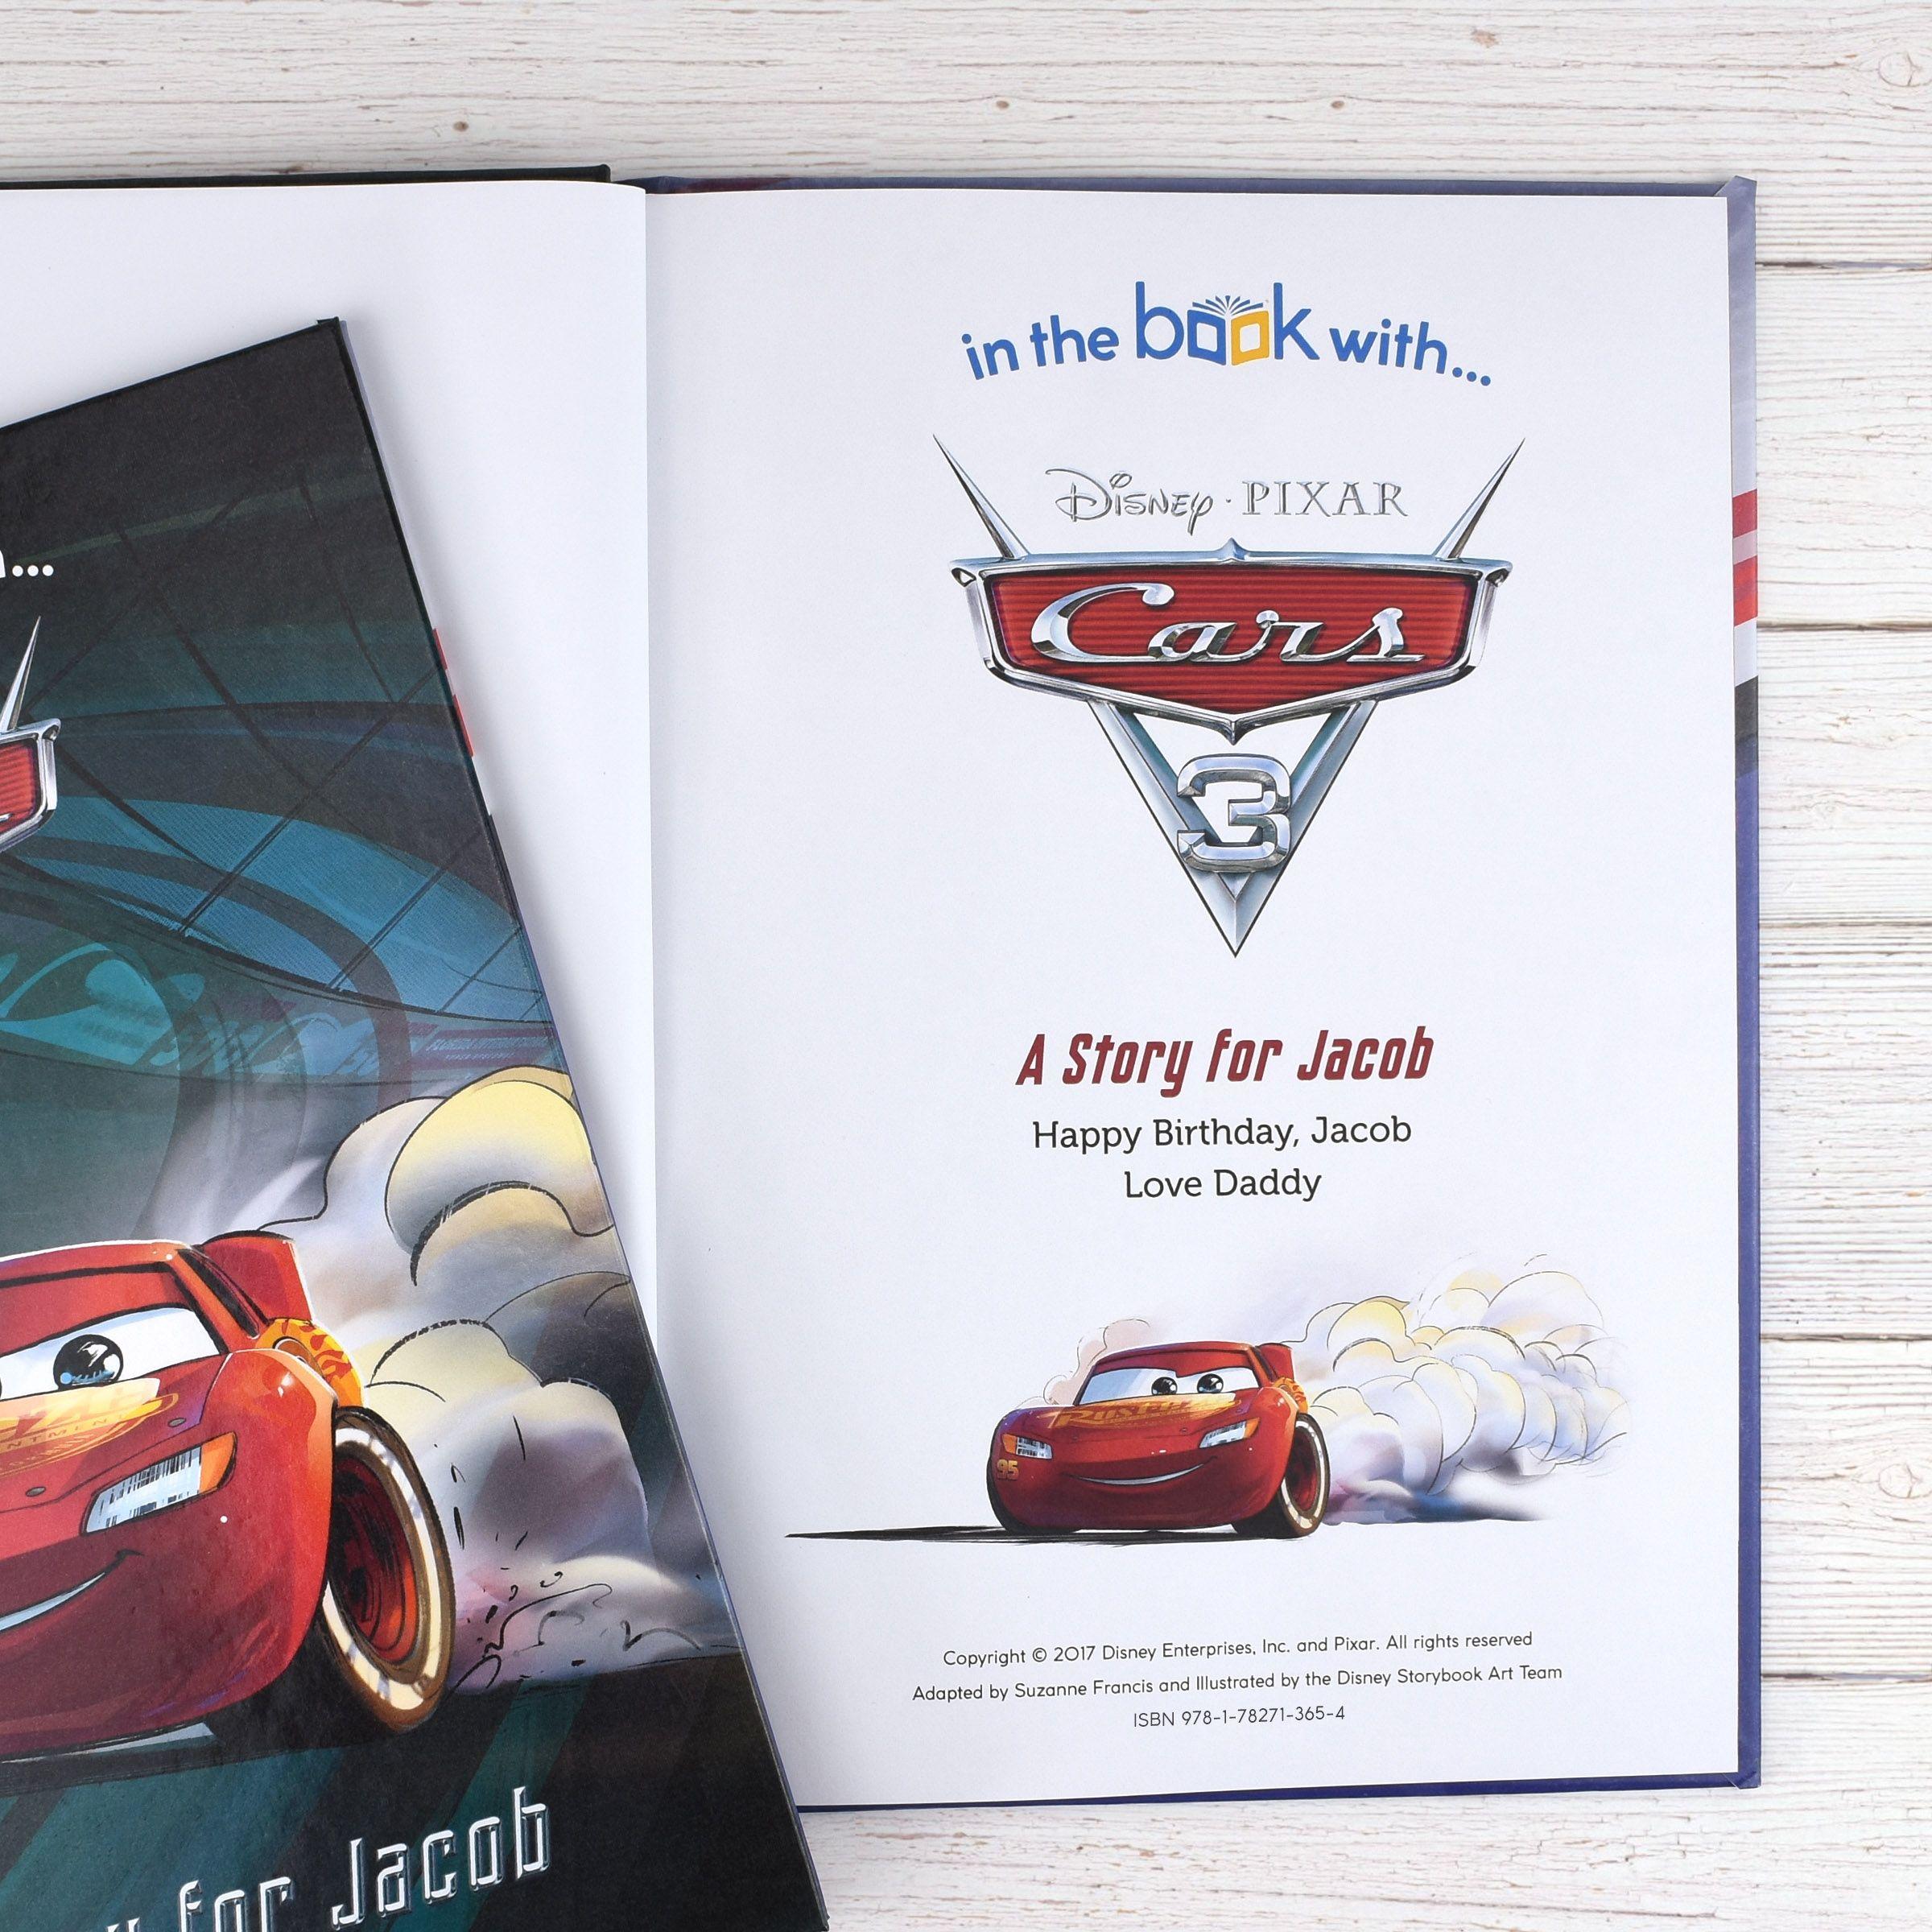 Disney Pixar Cars Personalized Logo - Personalized Disney Cars 3 Book. In The Book